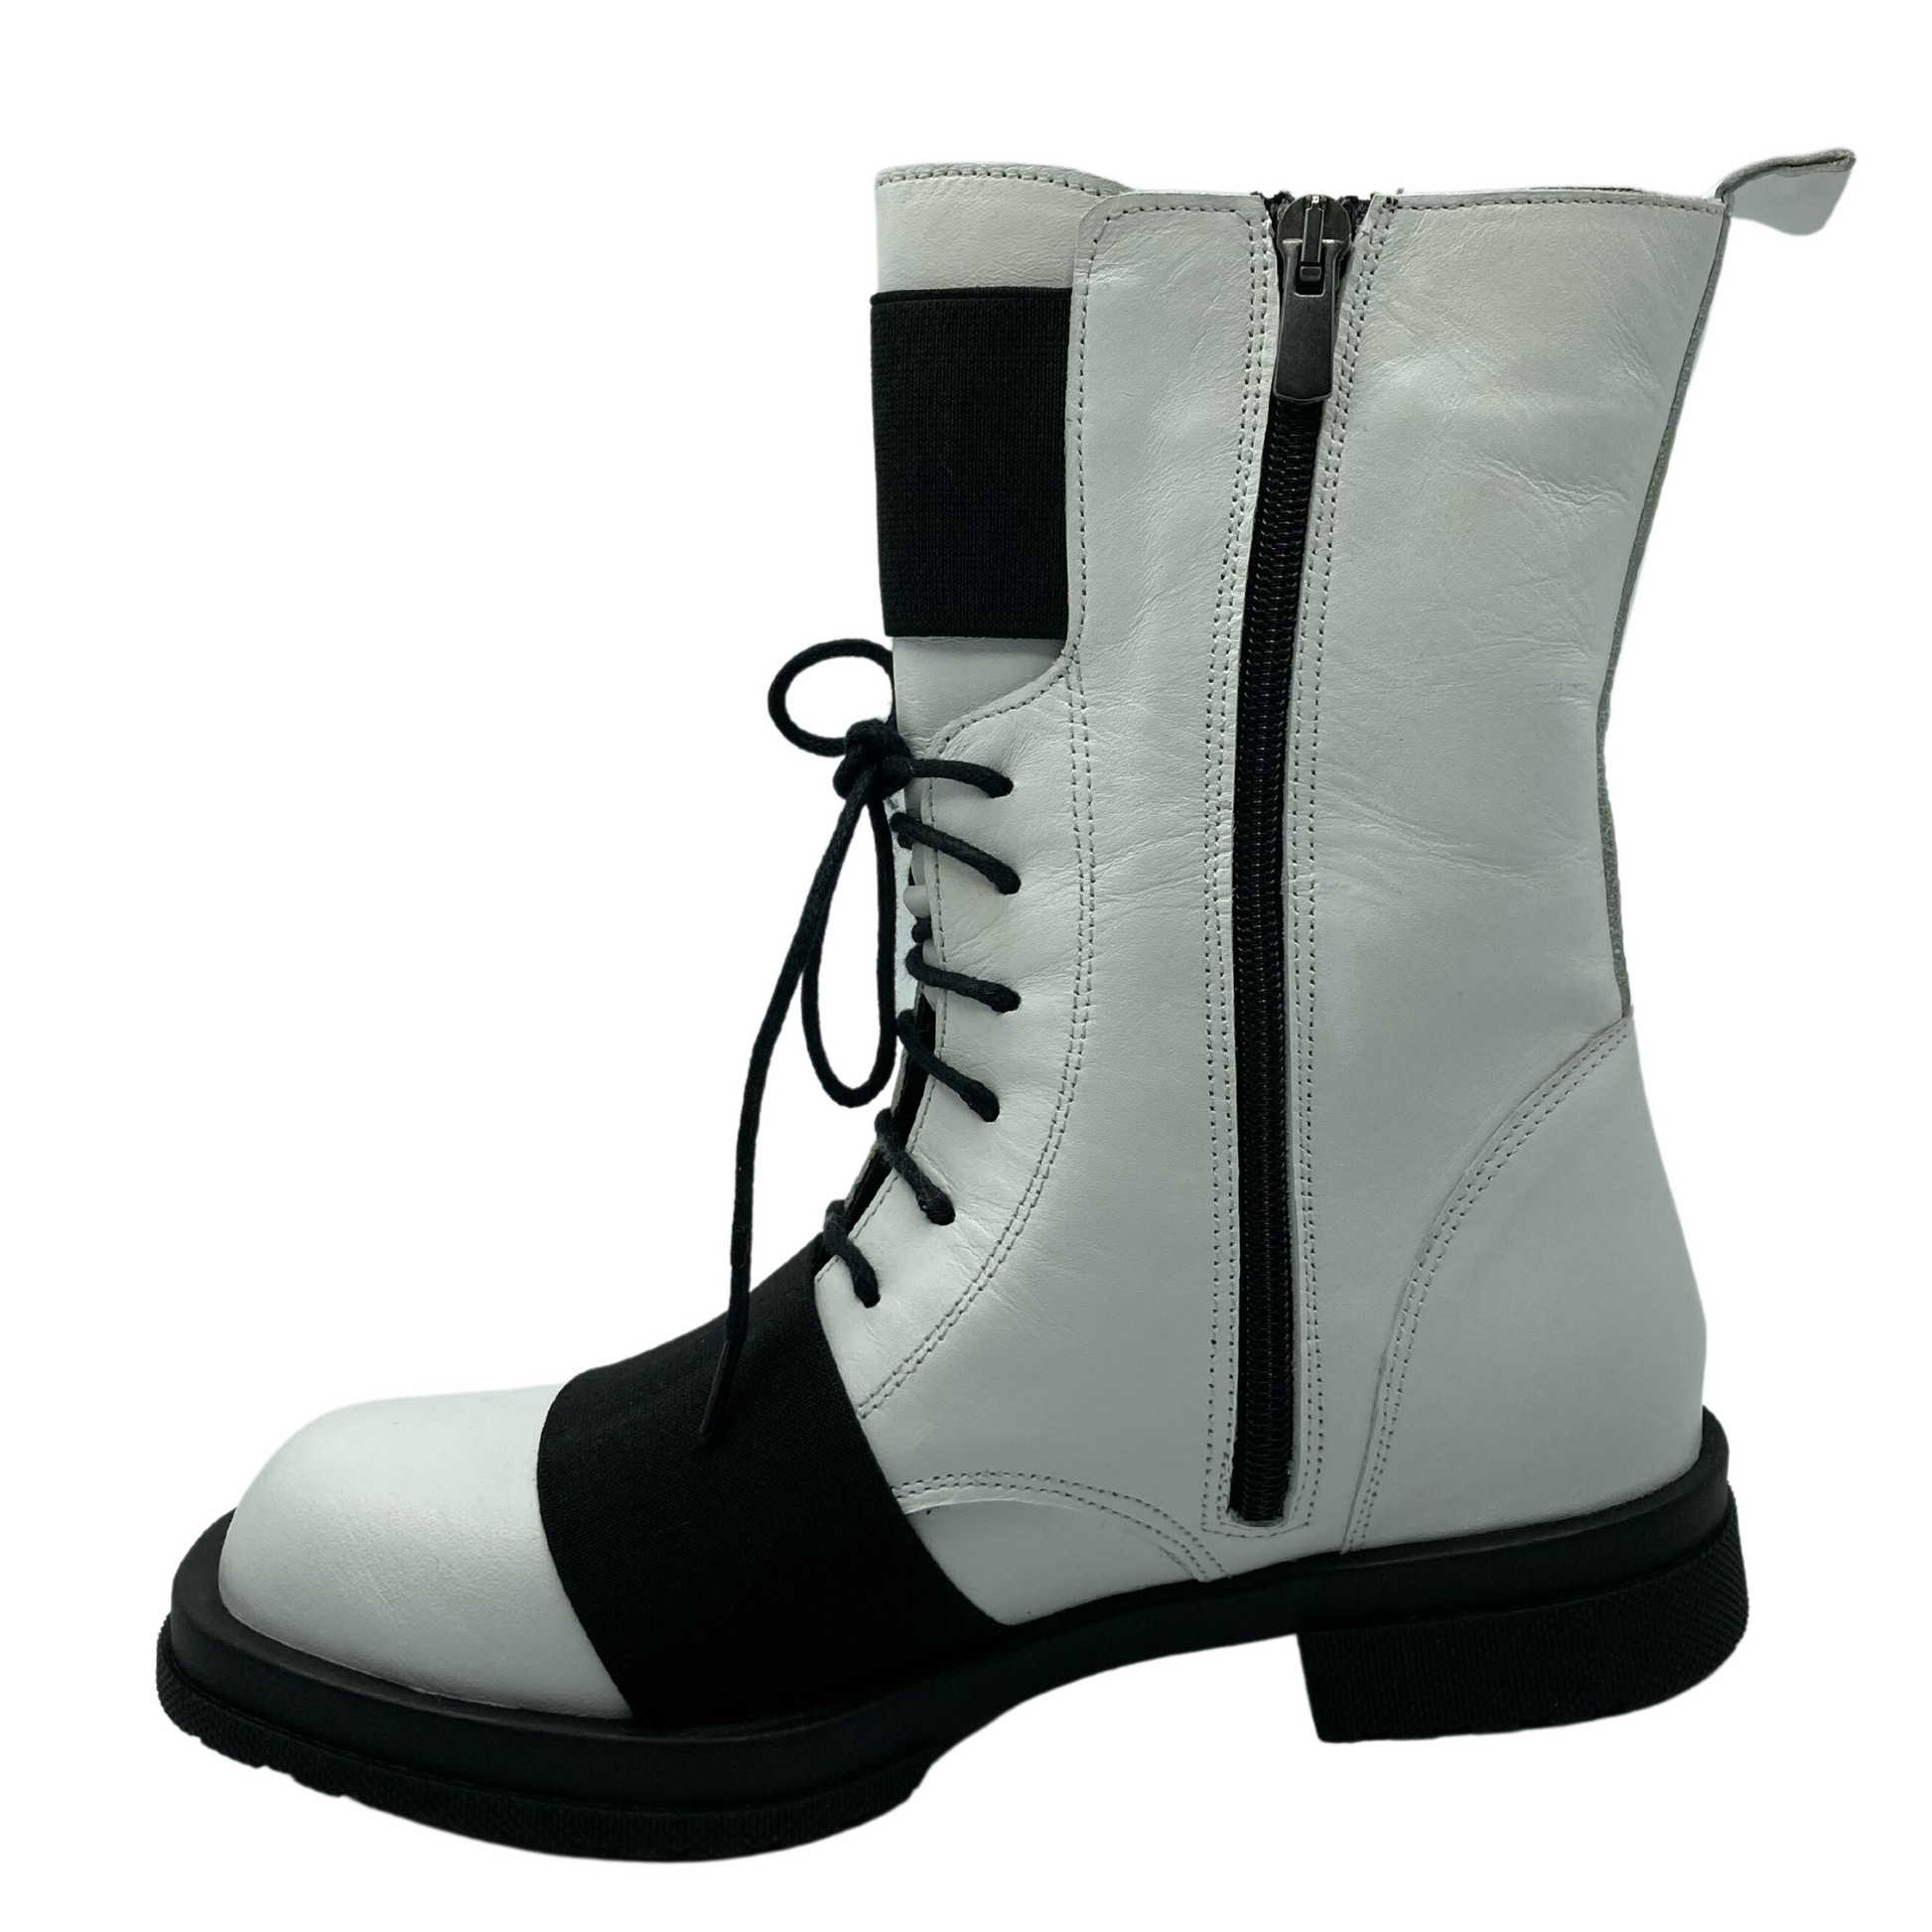 Left facing view of white leather short boot with side zipper closure and black outsole